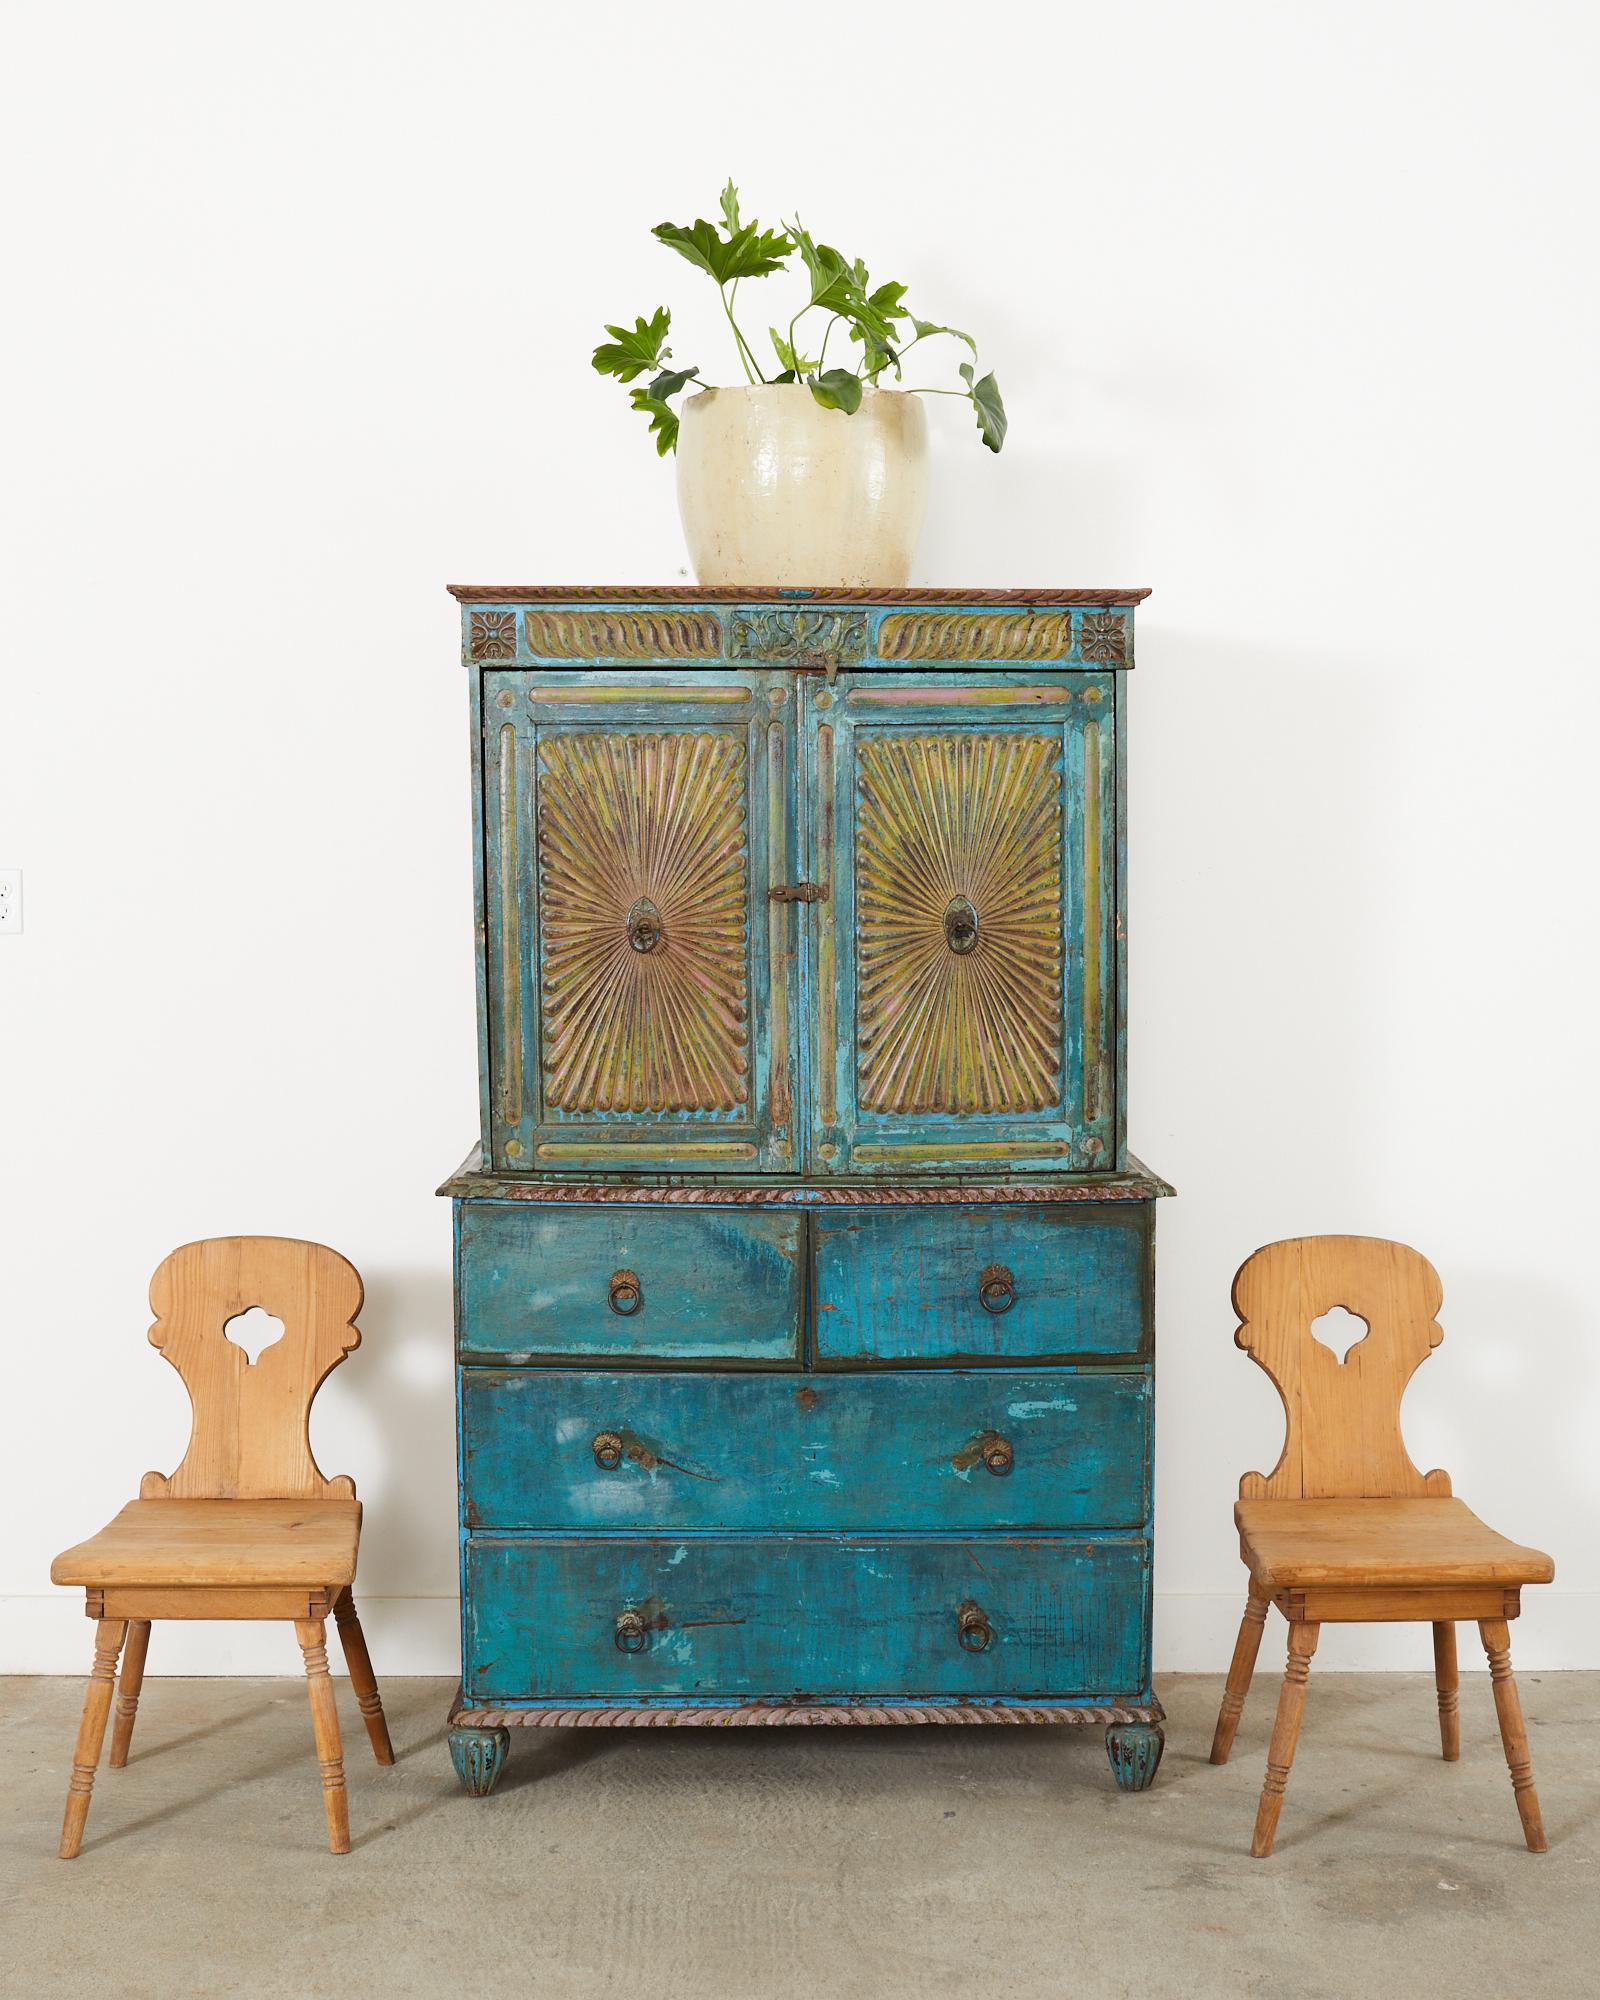 Fantastic Anglo-Indian 2-part linen press cabinet or dresser made in the British colonial style. The cabinet features two large front doors with a dramatic sunburst relief carving that opens to a large storage area. The doors are painted in a